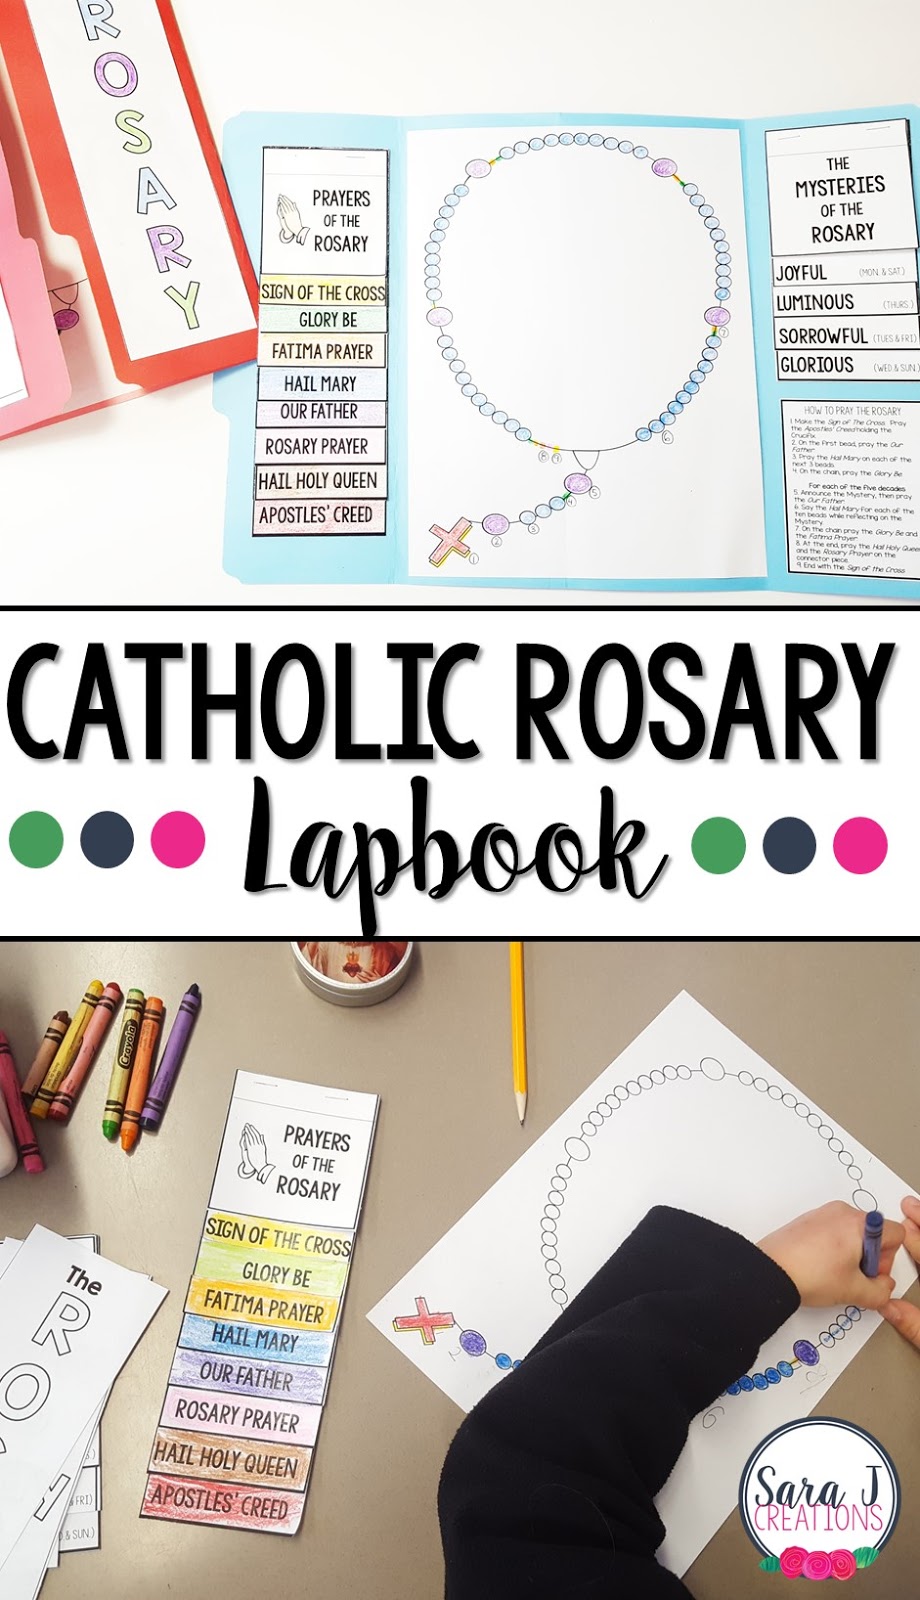 This lapbook is an awesome tool to teach Catholic kids how to pray the Rosary. 